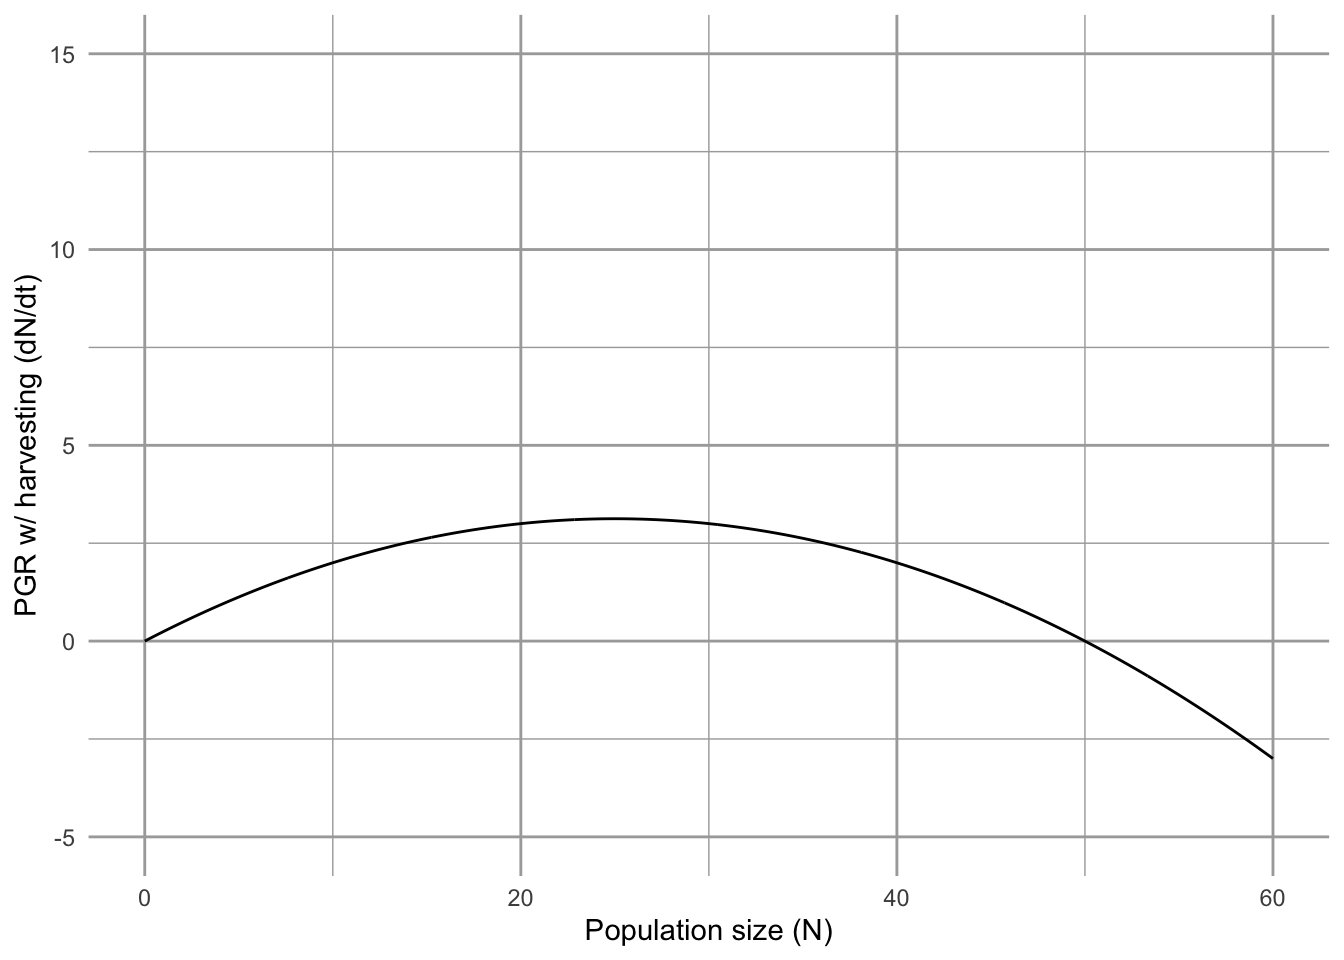 To find the predicted population growth rate with harvesting, we start with Logistic growth rate (solid line) and then substract harvest rate (dashed line) (left figure). This gives us population growth rate in the presence of harvesting (right figure).